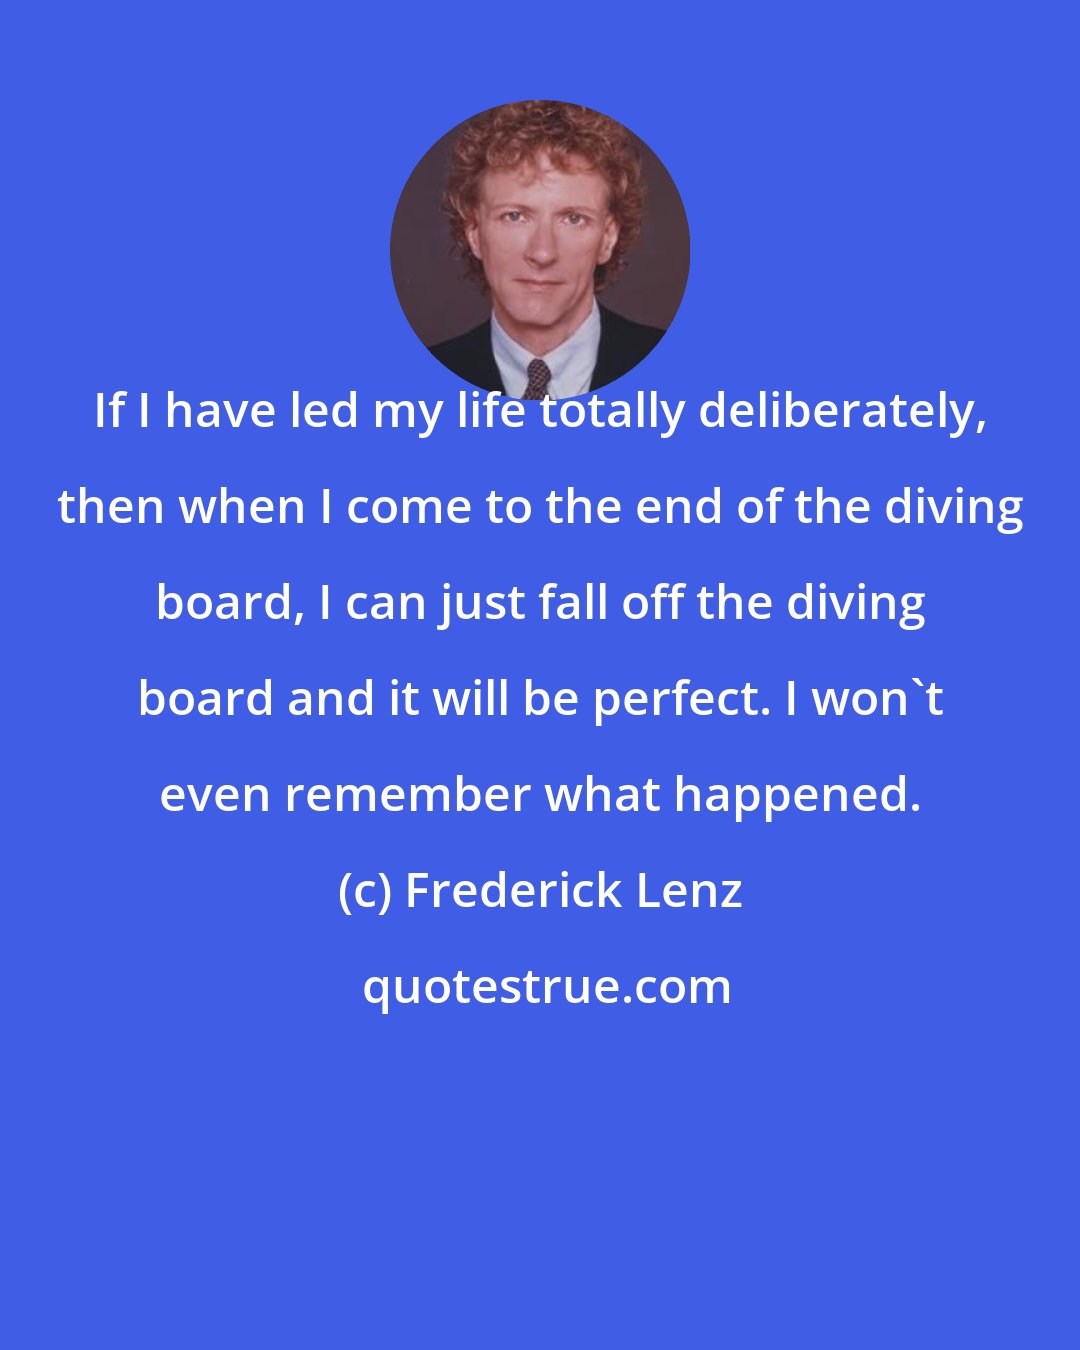 Frederick Lenz: If I have led my life totally deliberately, then when I come to the end of the diving board, I can just fall off the diving board and it will be perfect. I won't even remember what happened.